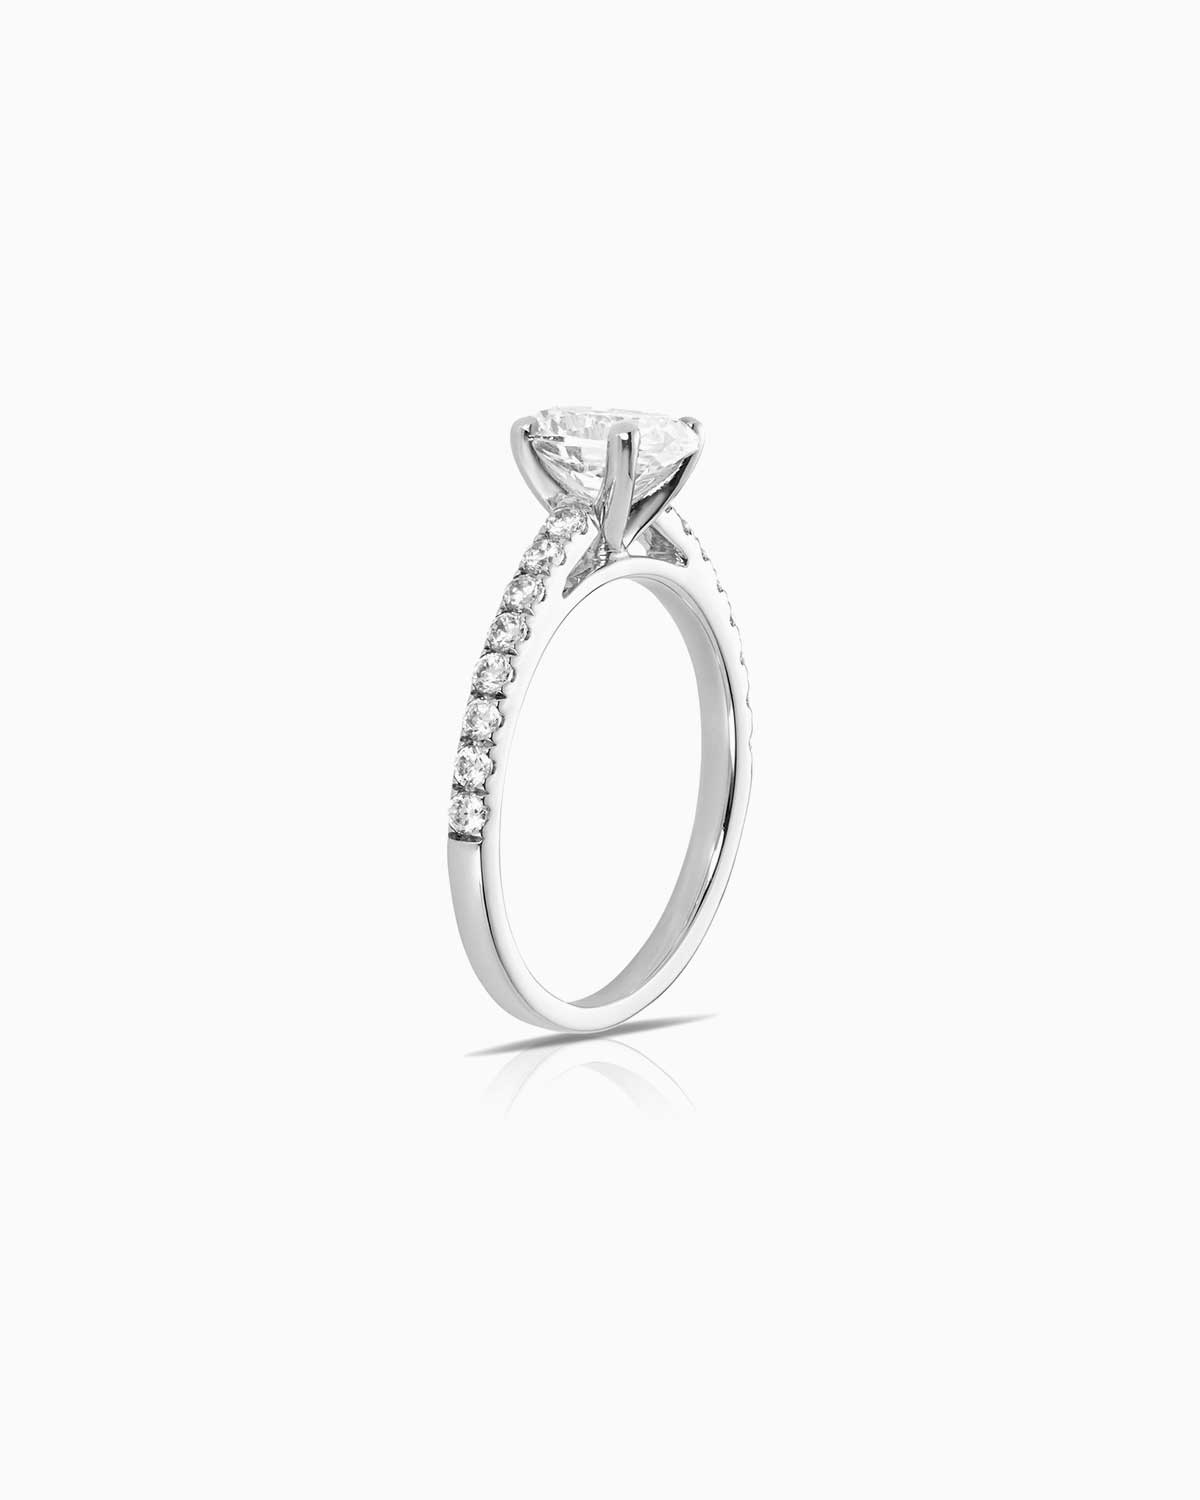 oval diamond engagement ring featuring shoulder diamonds and set in 18 karat white gold by claude and me jewellery